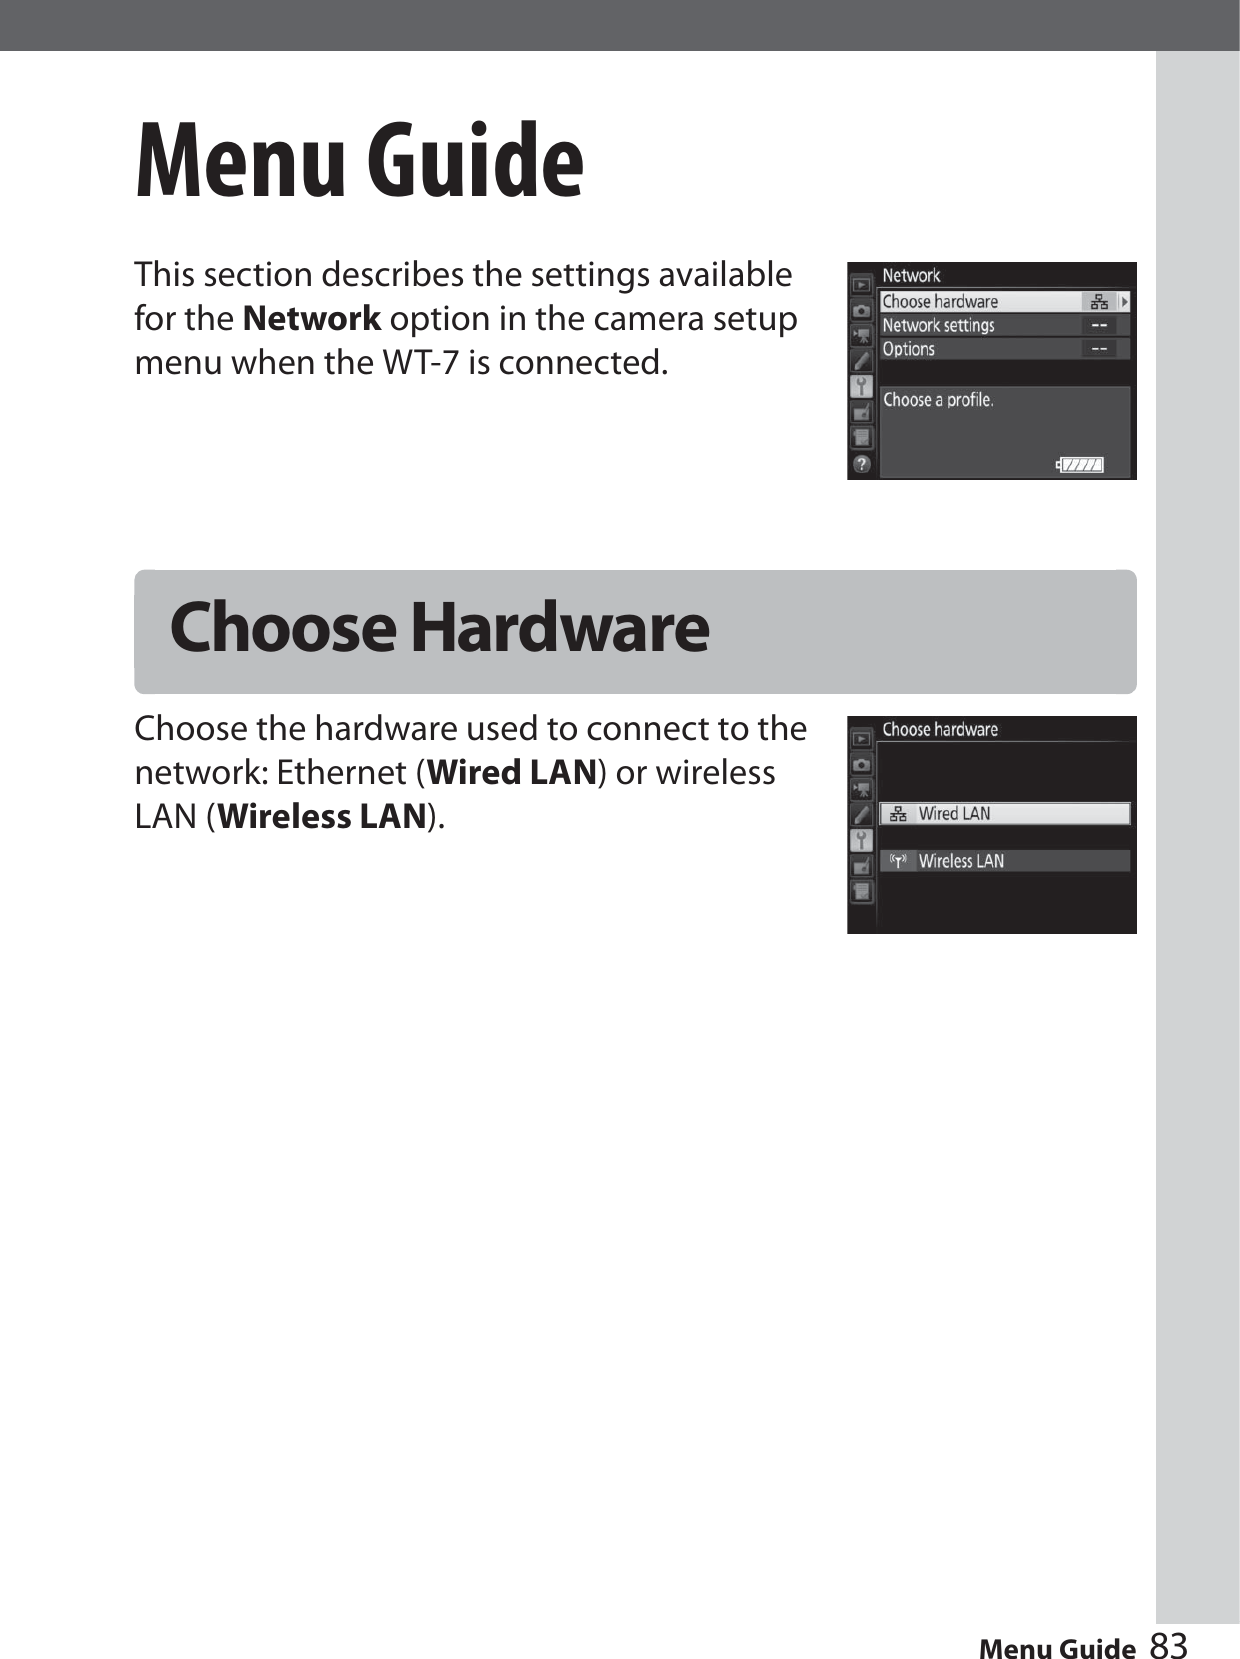 83Menu GuideMenu GuideThis section describes the settings available for the Network option in the camera setup menu when the WT-7 is connected.Choose the hardware used to connect to the network: Ethernet (Wired LAN) or wireless LAN (Wireless LAN).Choose Hardware